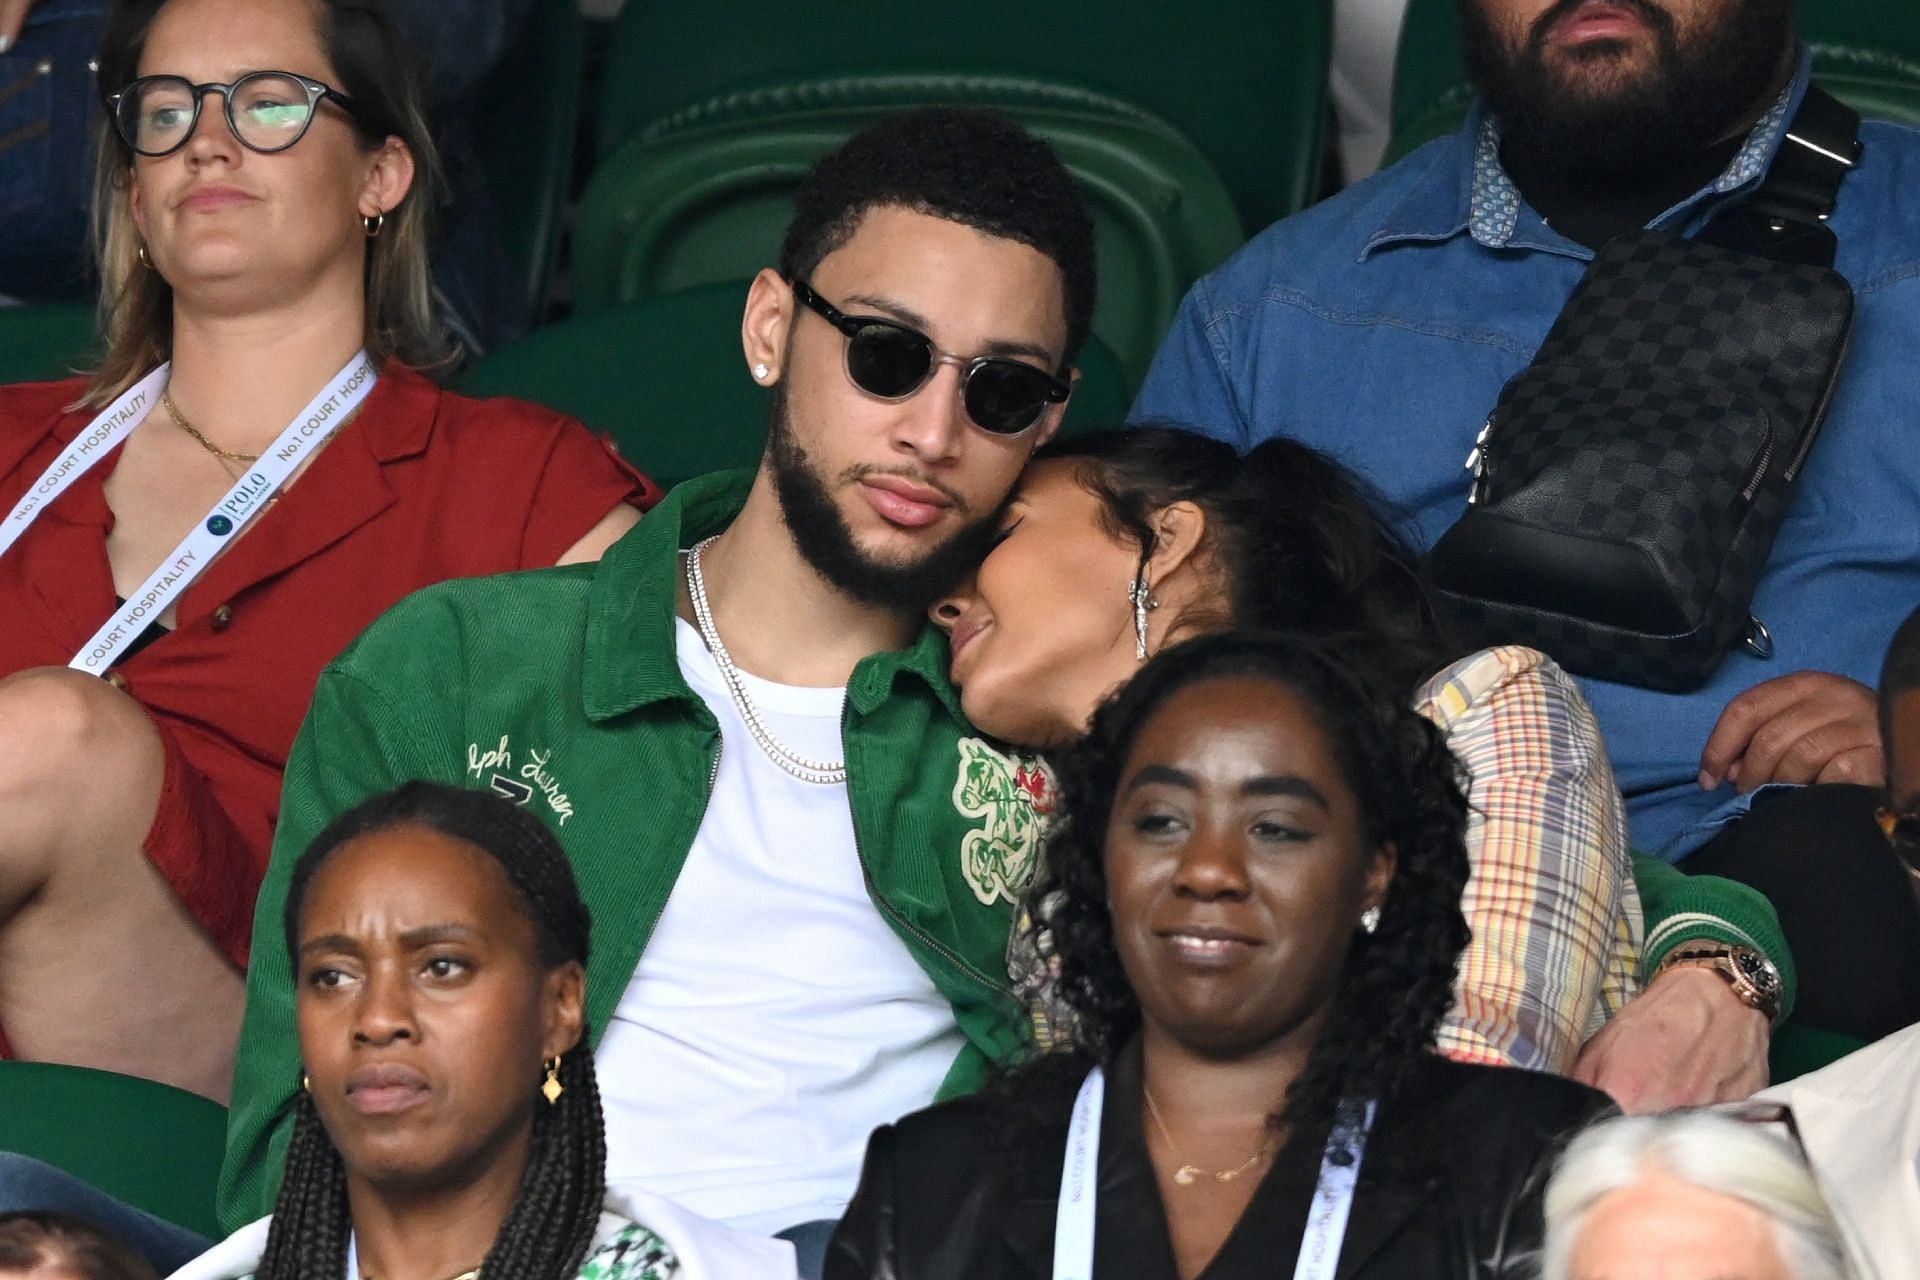 Maya Jama&#039;s presence in South Beach before the Brooklyn Nets face the Miami Heat raises speculation that Ben Simmons is traveling with the Heat. [Photo: GQ Australia]